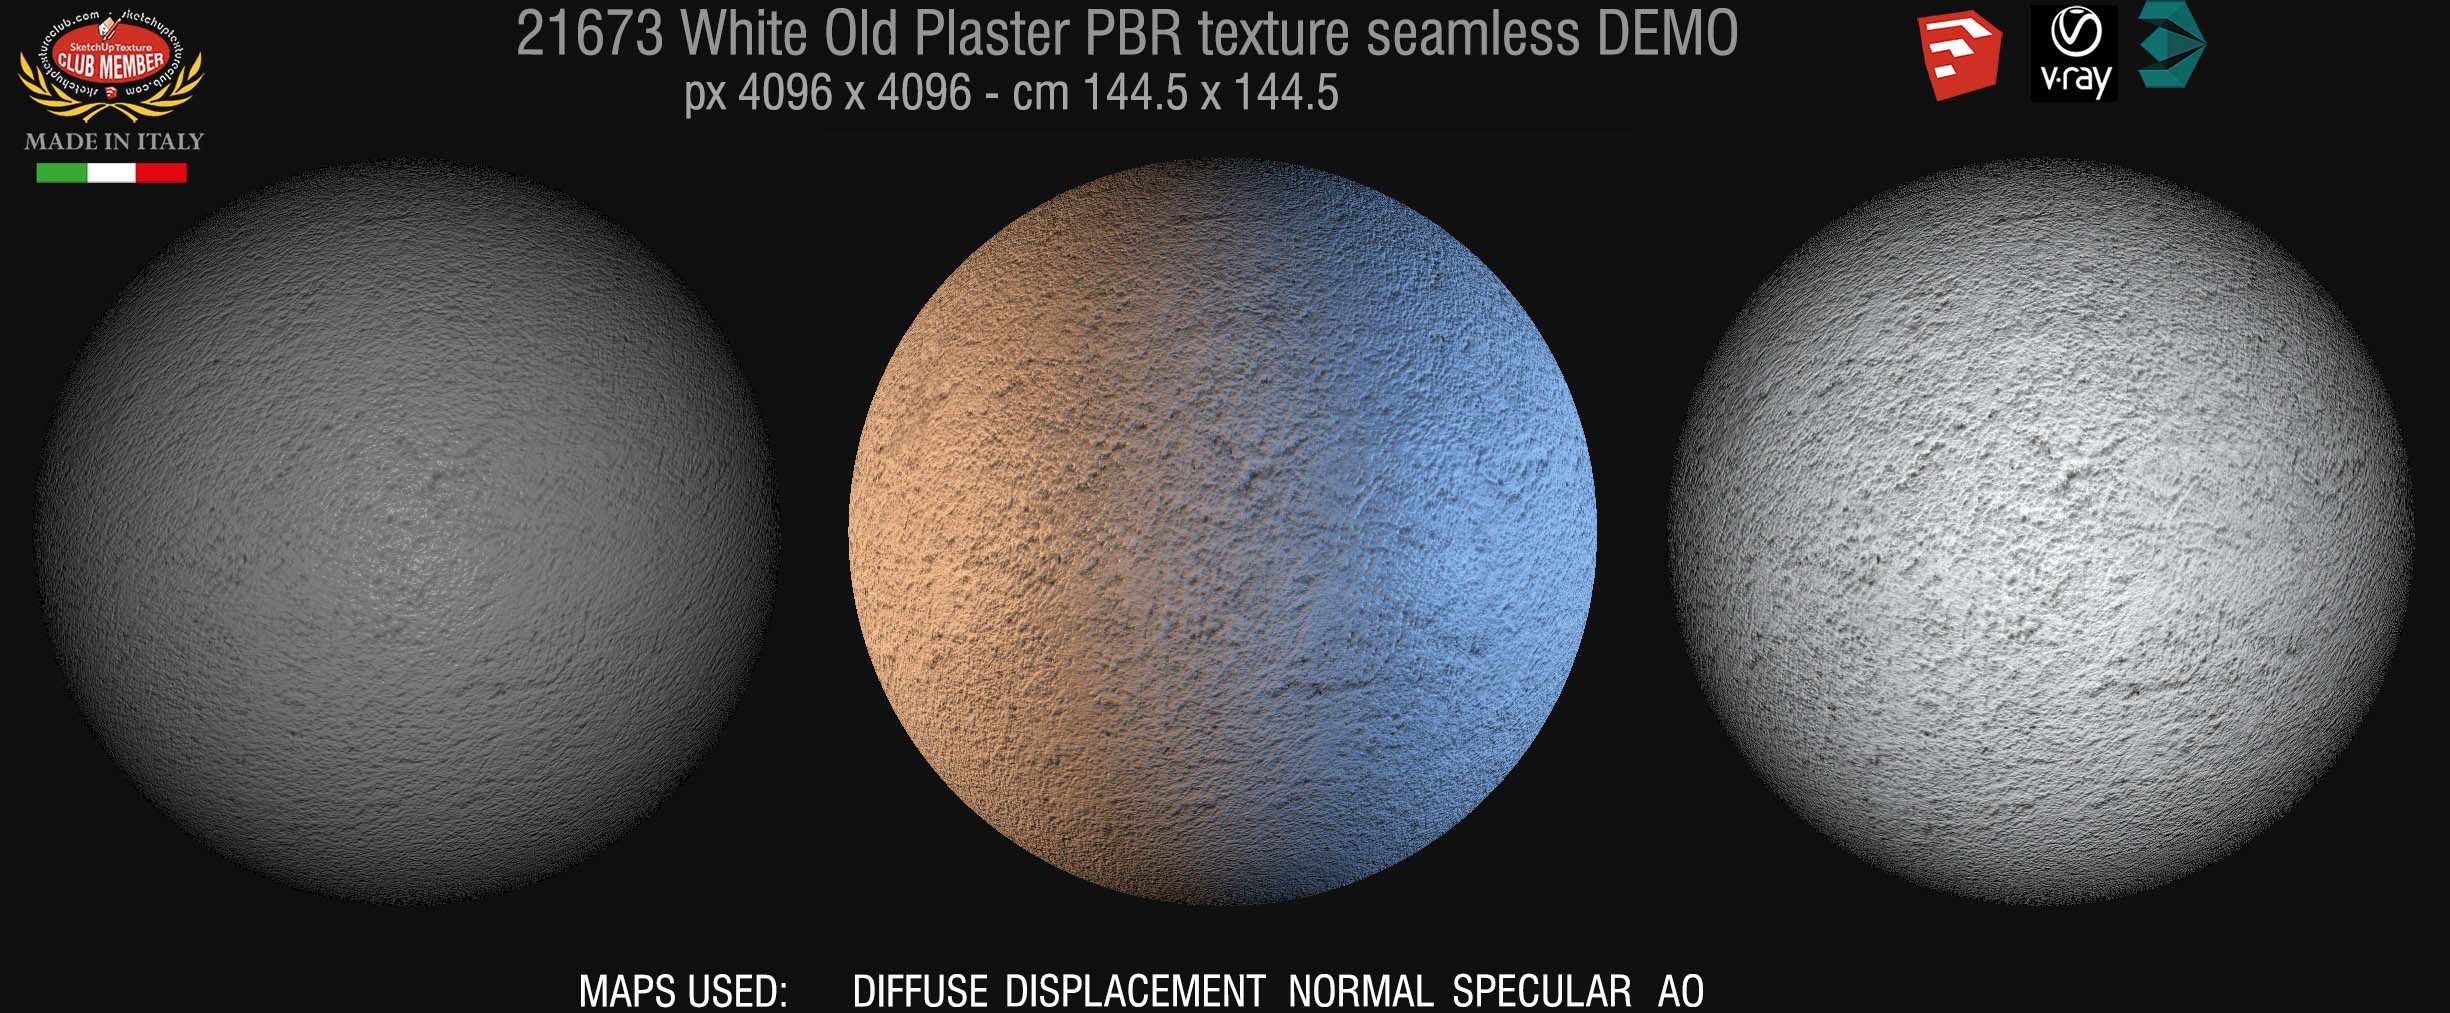 21673 white old plaster PBR texture seamless DEMO